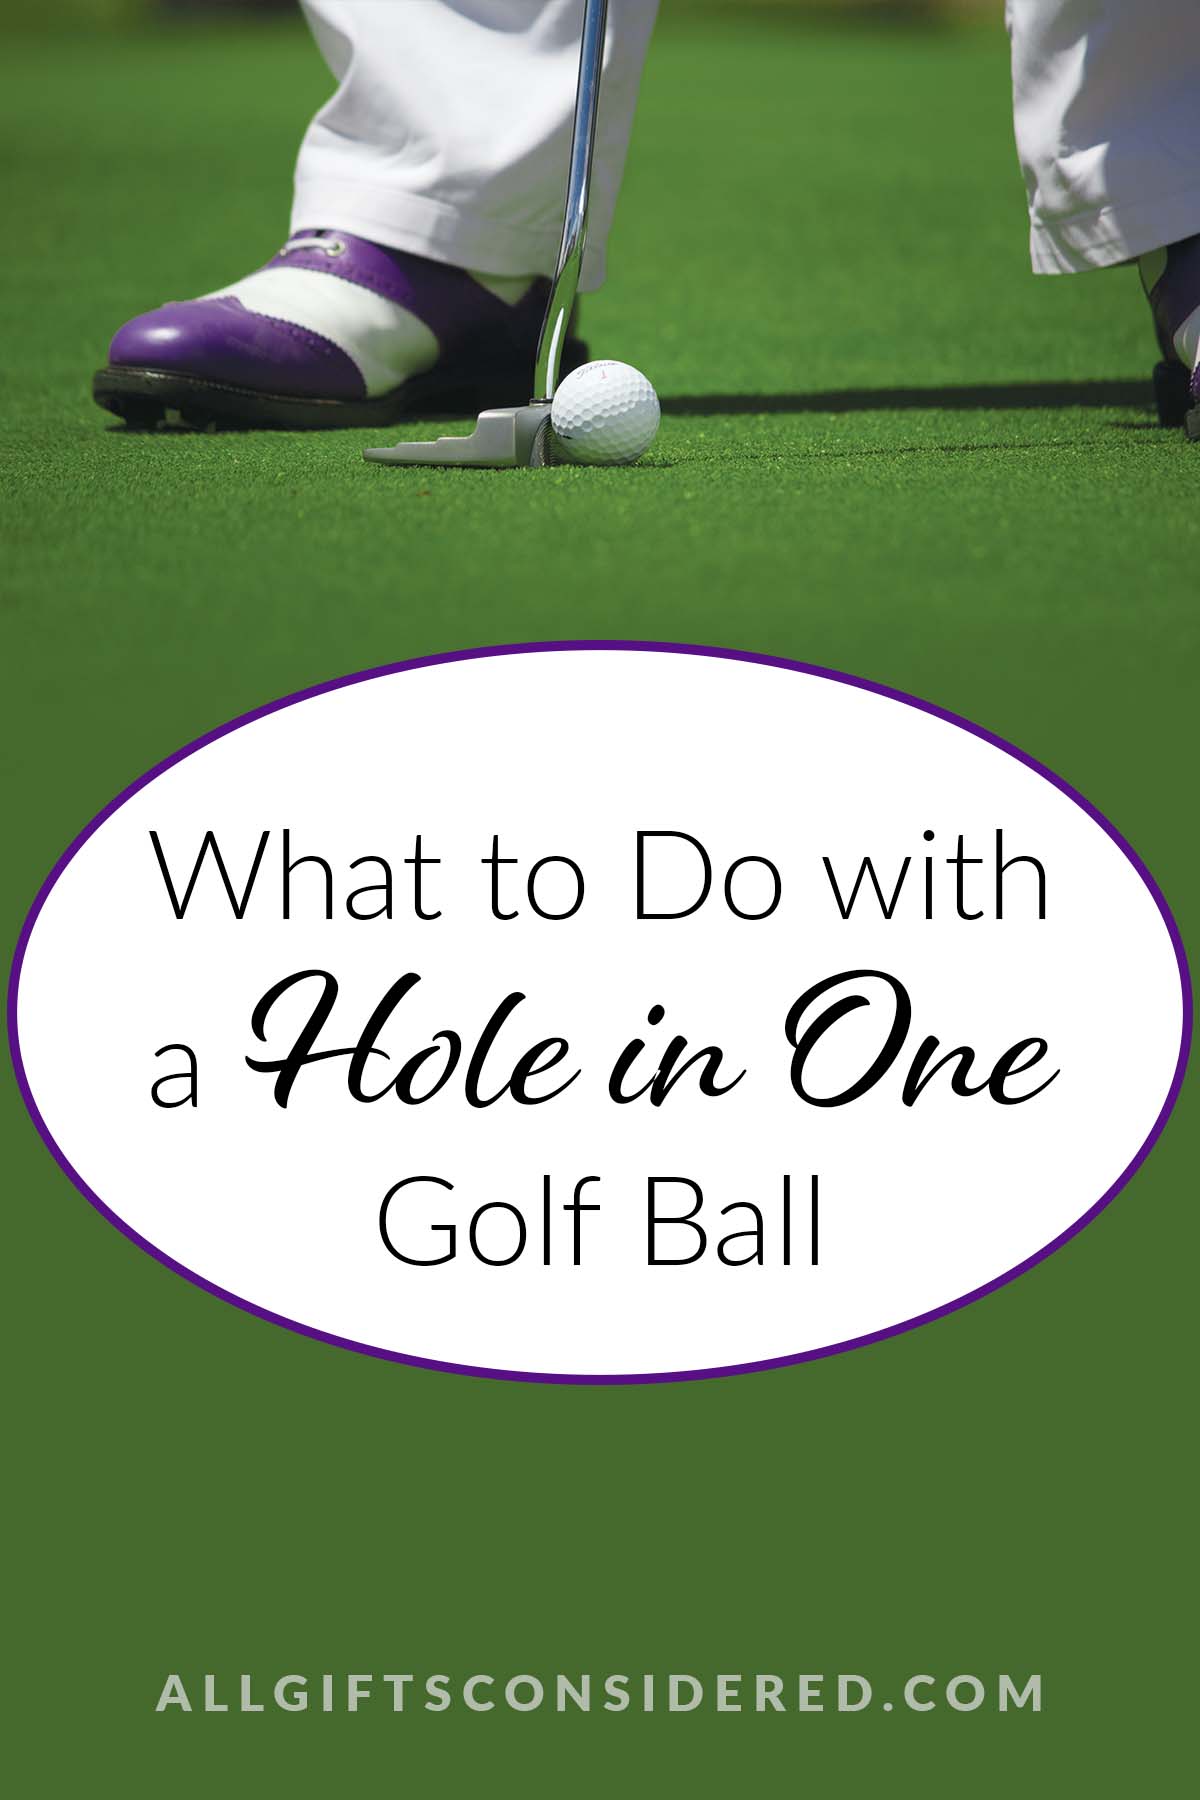 hole in one golf ball - feat image